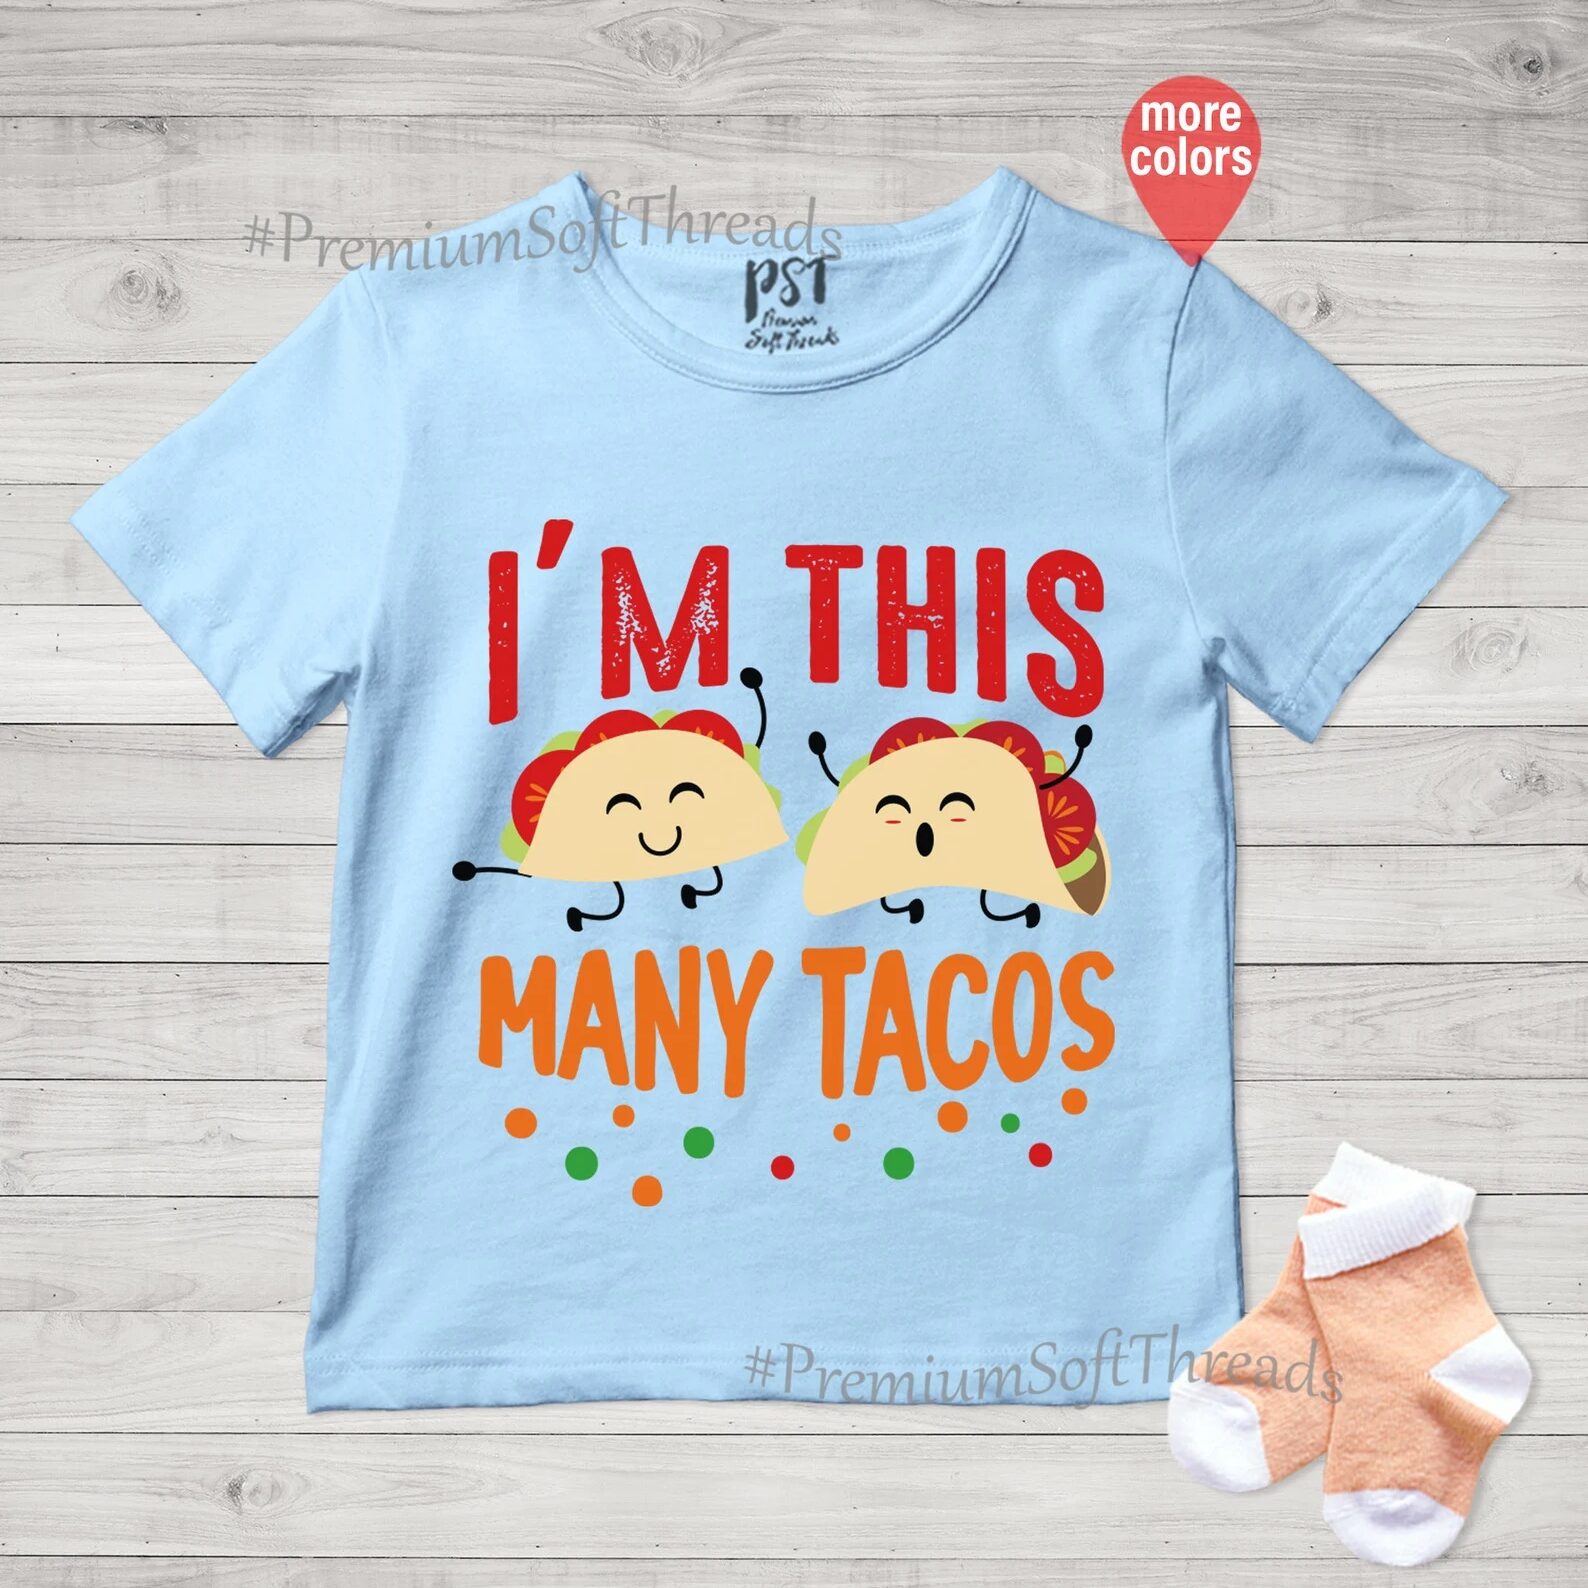 T-shirt with text I'm this many tacos. Two cartoon tacos with faces, feet, and arms smile and jump.